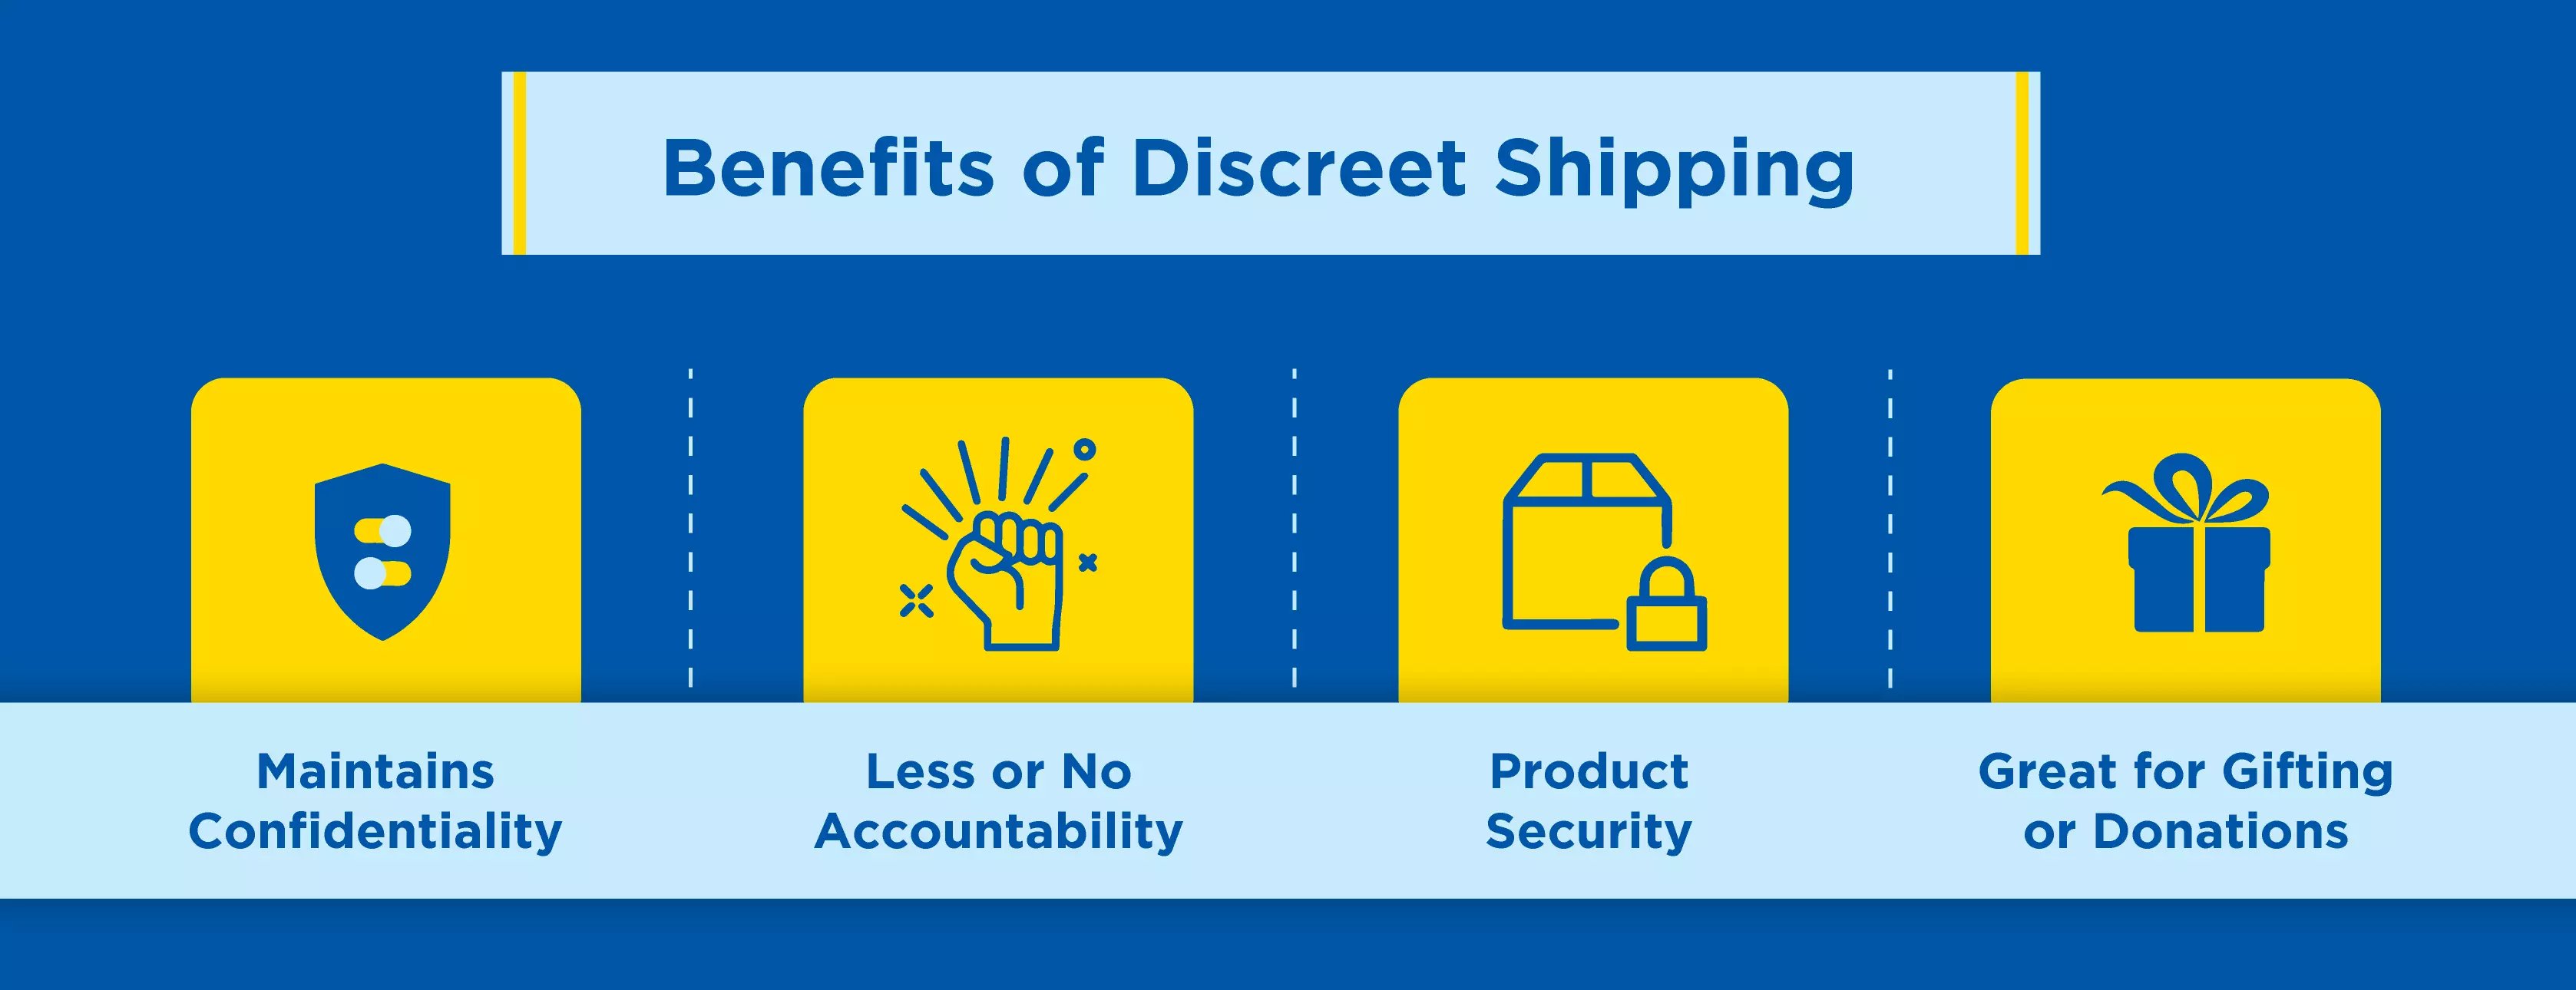 Benefits-of-Discreet-shipping